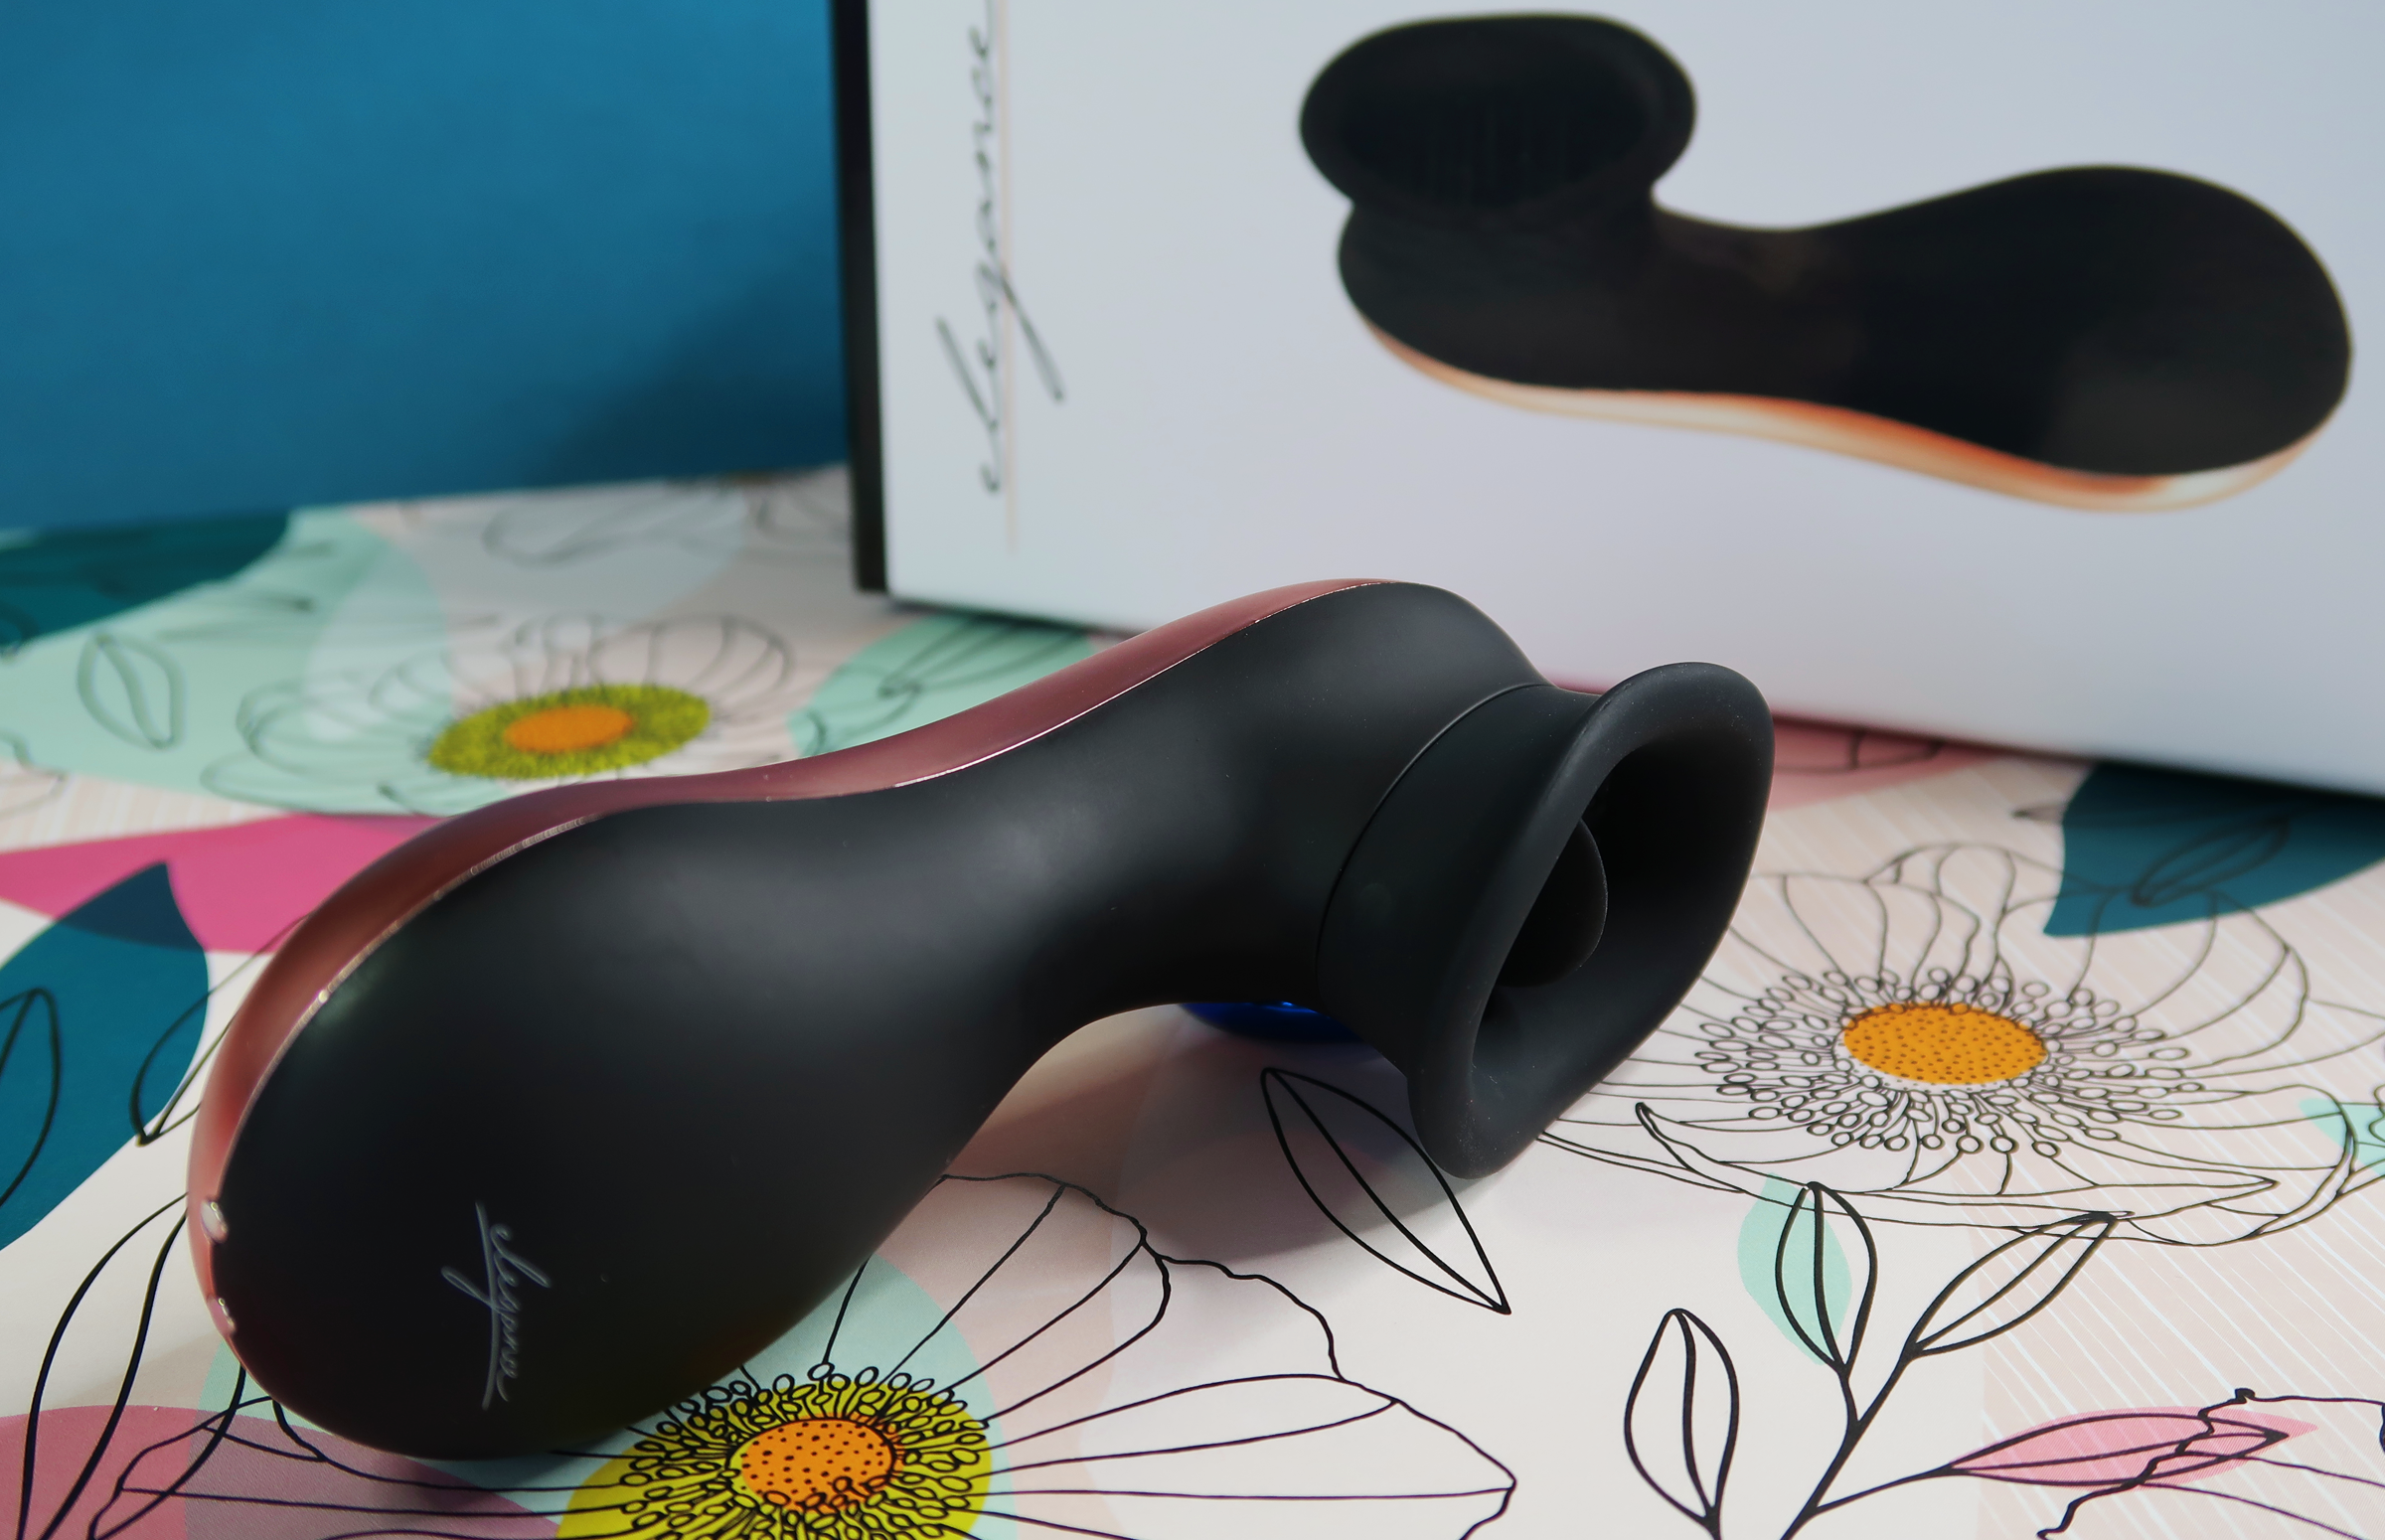 A sex toy that's shaped almost like a phone (not a cellphone) with a nozzle face that contains a small, flickable tab.